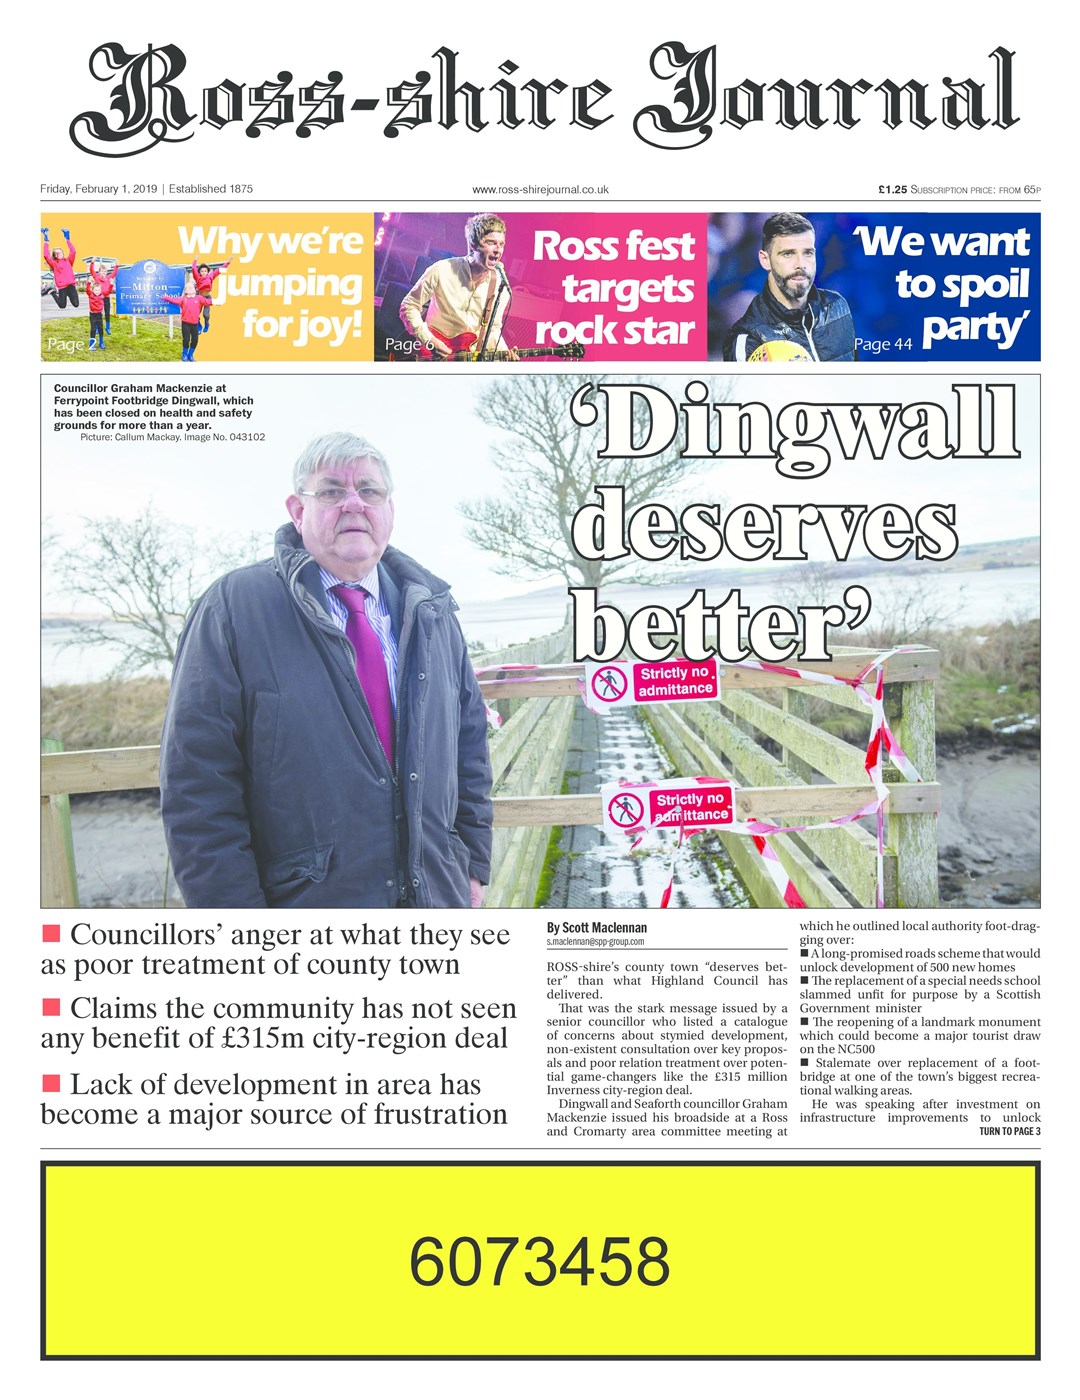 The Ross-shire's coverage of the community struggling to reopen its bridge.